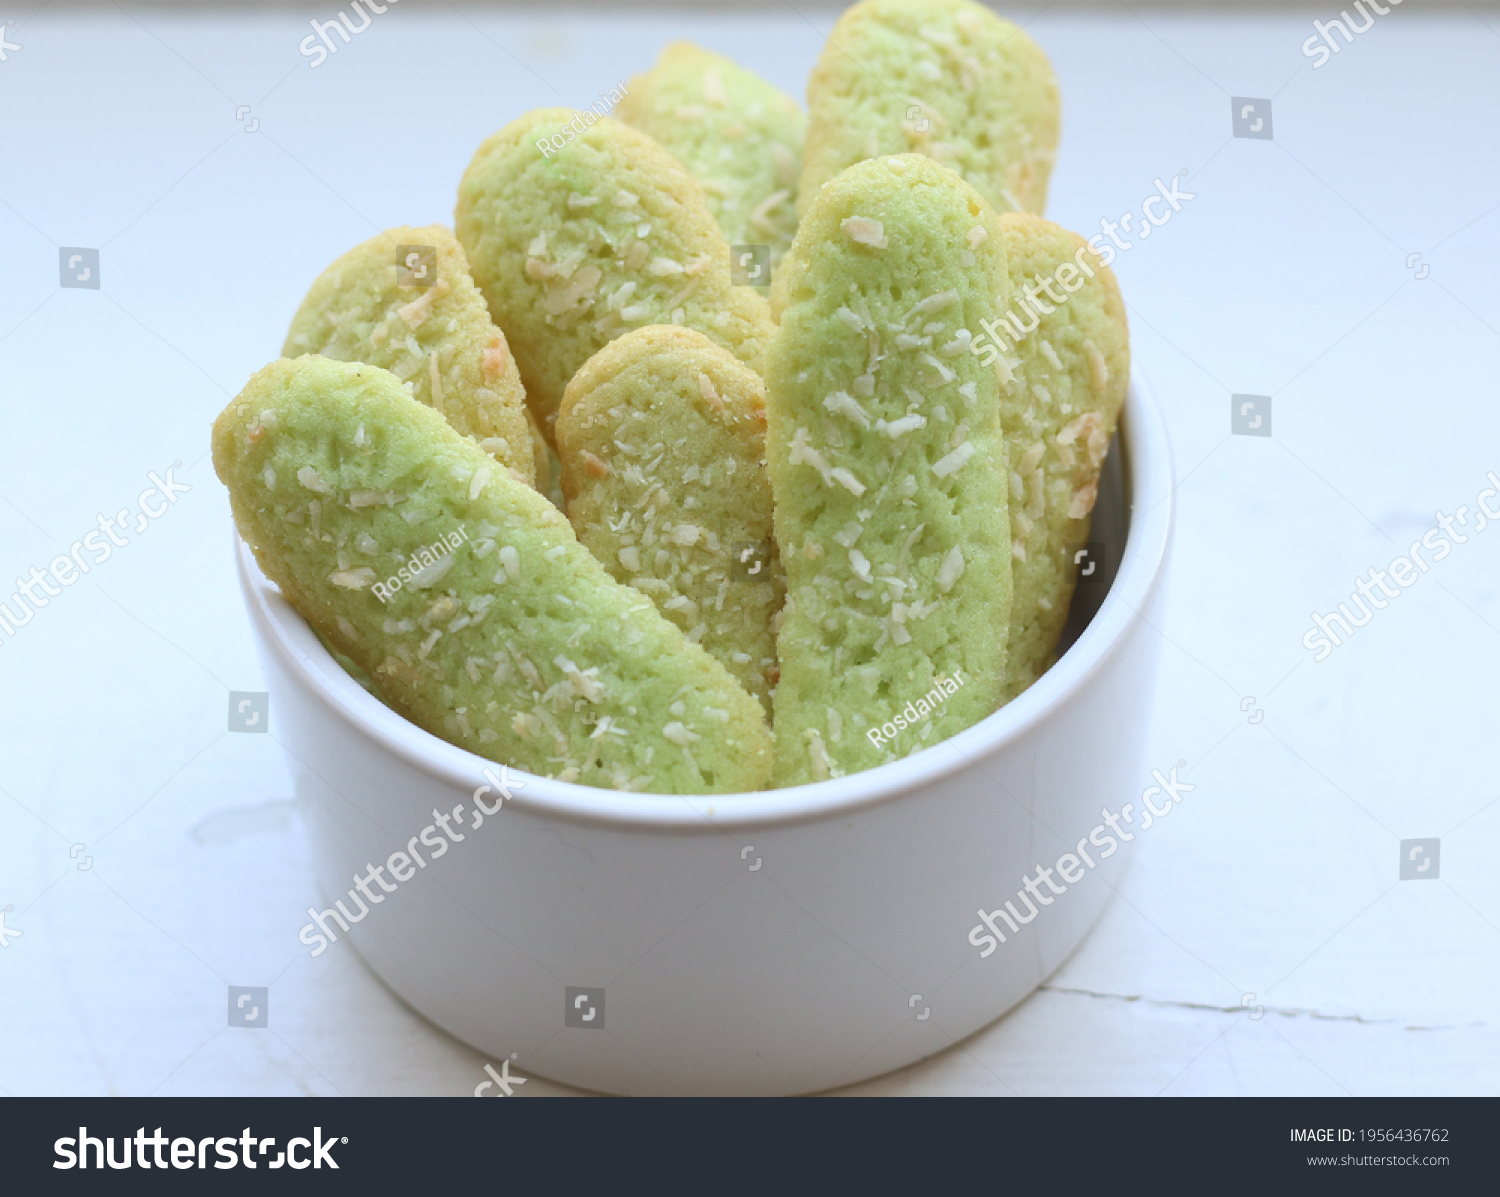 Lidah kucing are cookies shaped like a long and - Royalty Free 